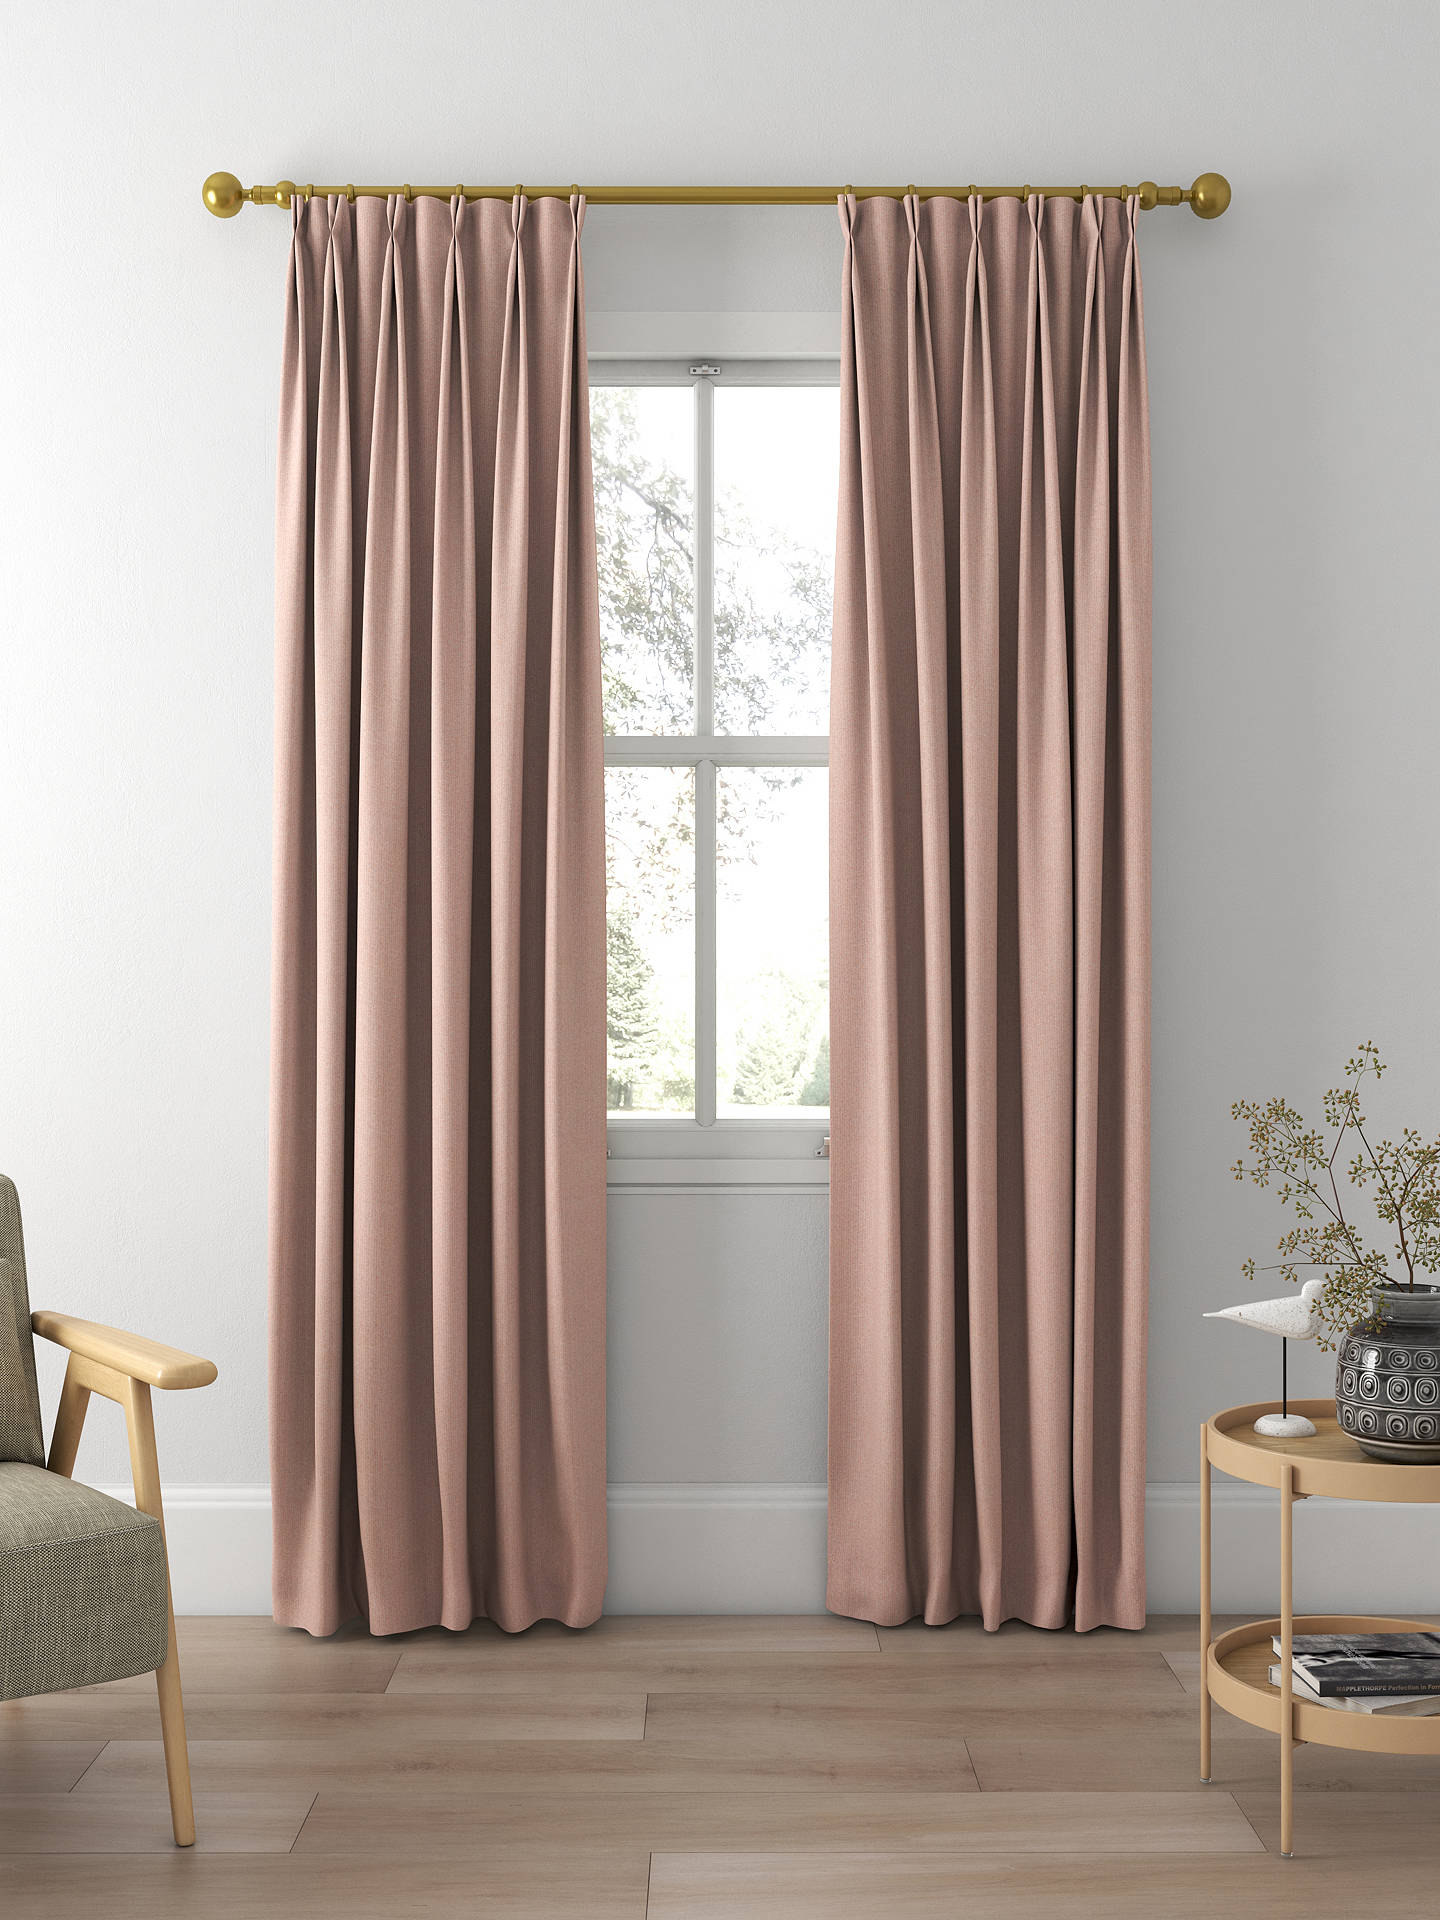 Sanderson Hector Made to Measure Curtains, Heather